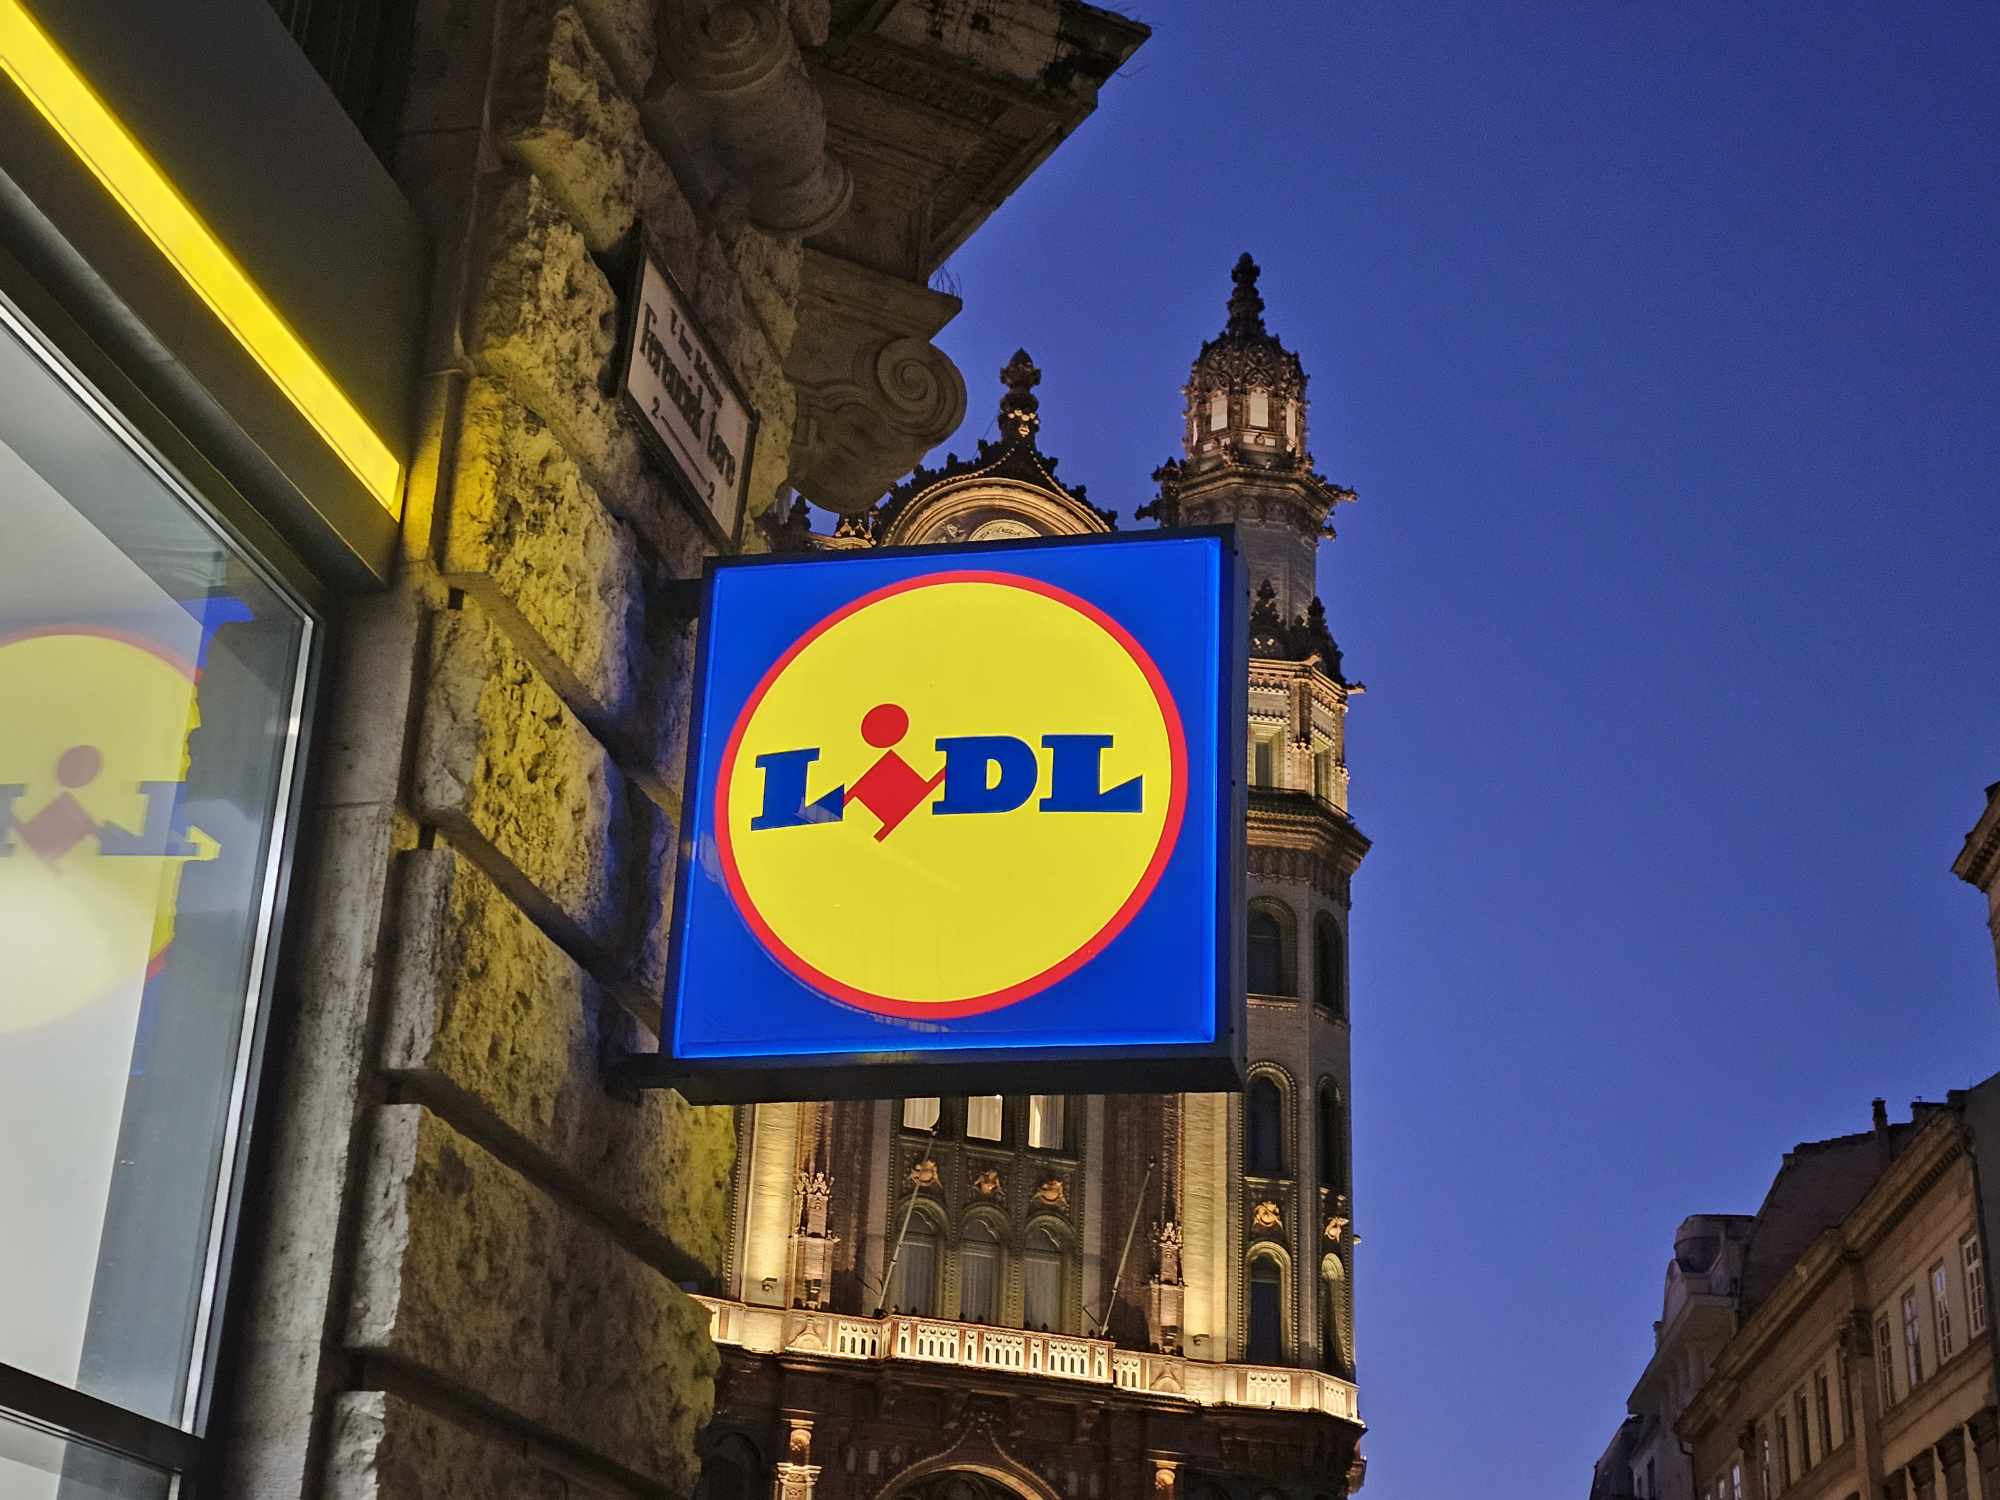 It will start on Monday.  Cheap clothes for the whole family at Lidl